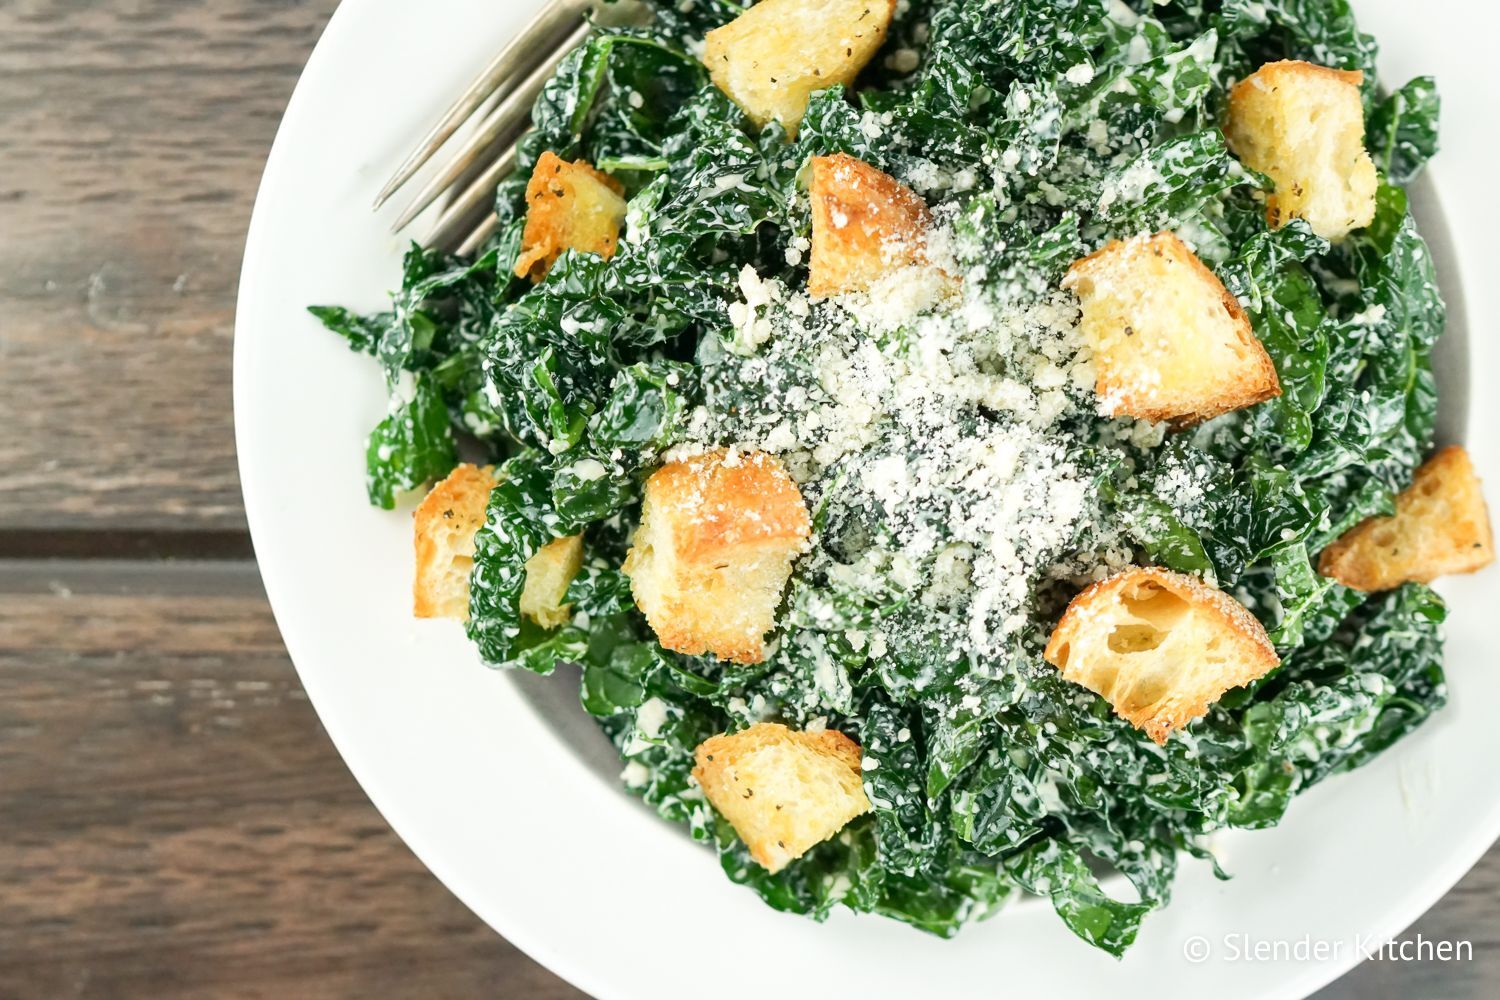 Kale caesar salad with croutons and Parmesan cheese on a plate with a fork.